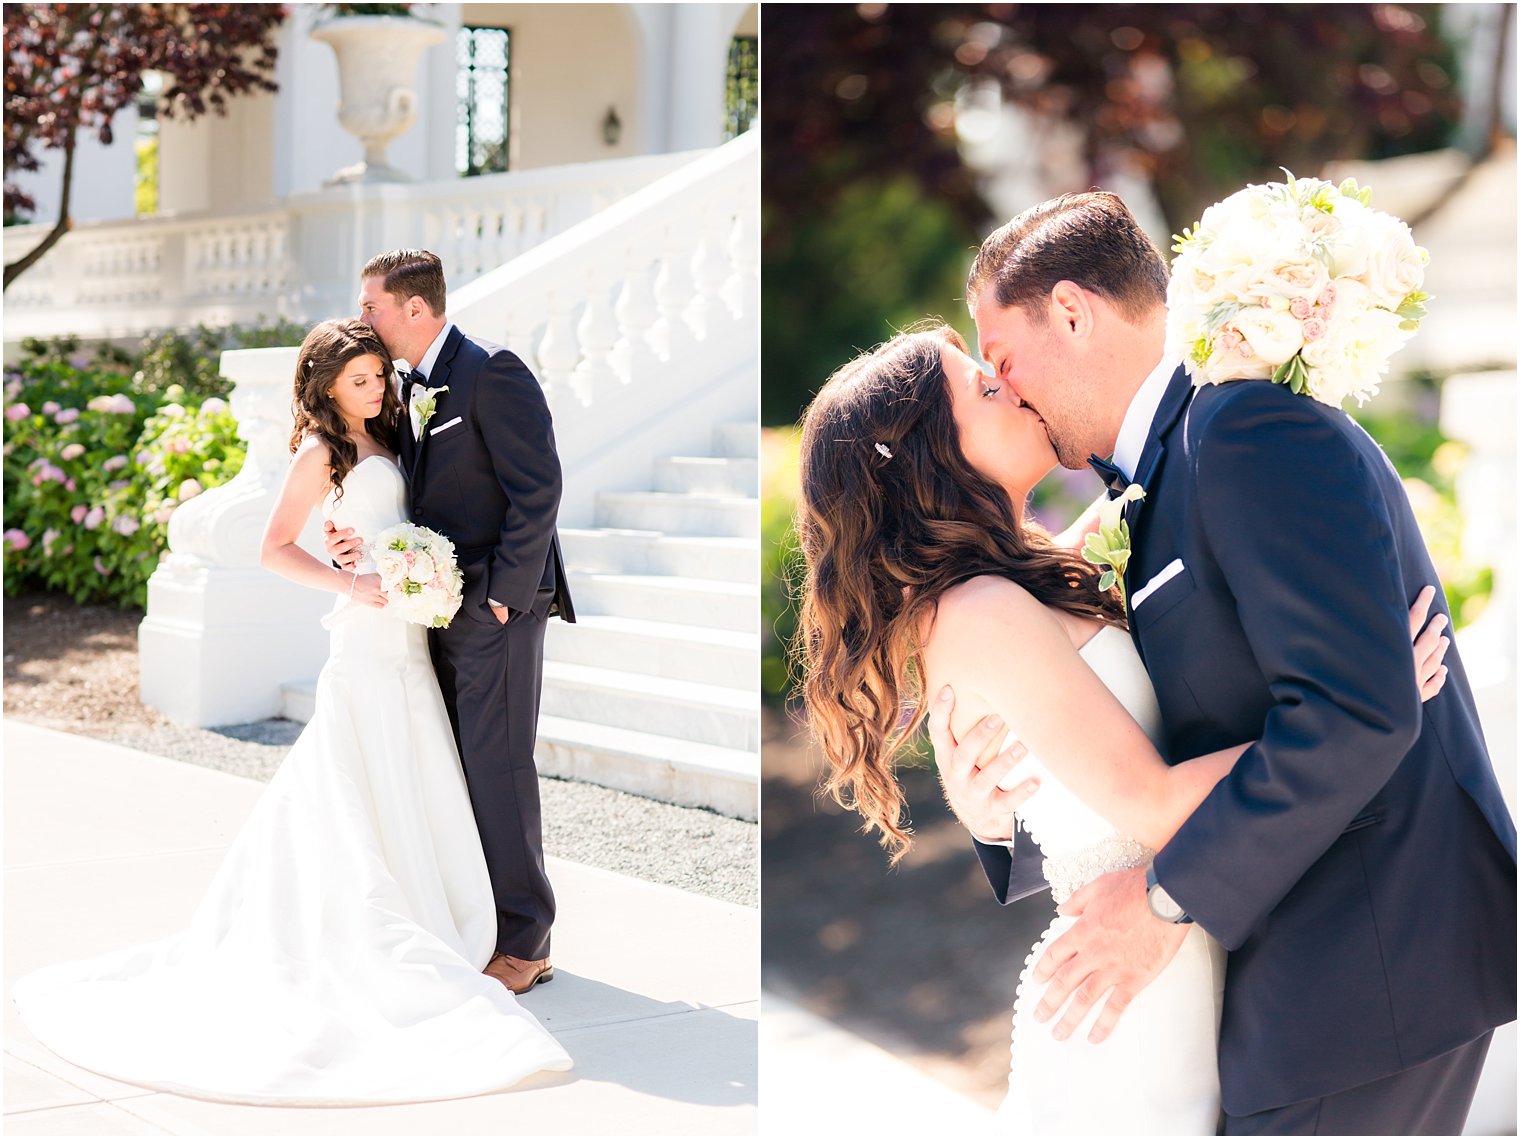 Romantic bride and groom photo at Monmouth University